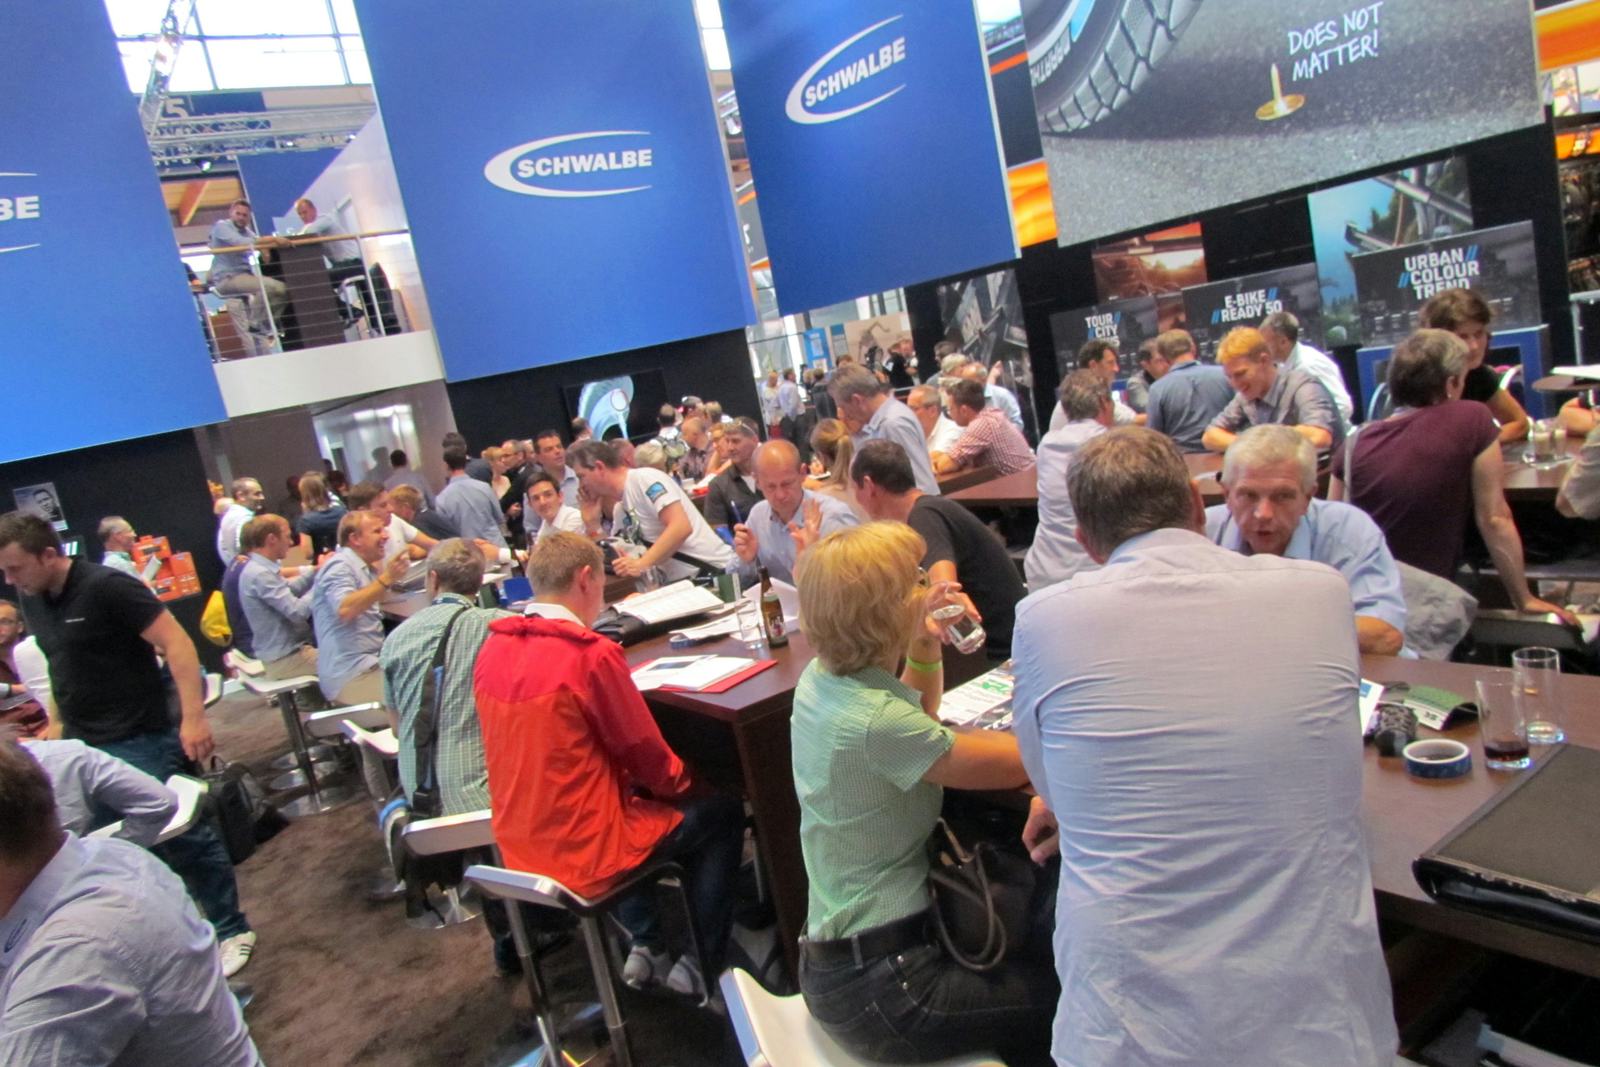 A record number of 46,300 trade visitors came to Messe Friedrichshafen to see the latest products in the bicycle industry. – Photo Bike Europe